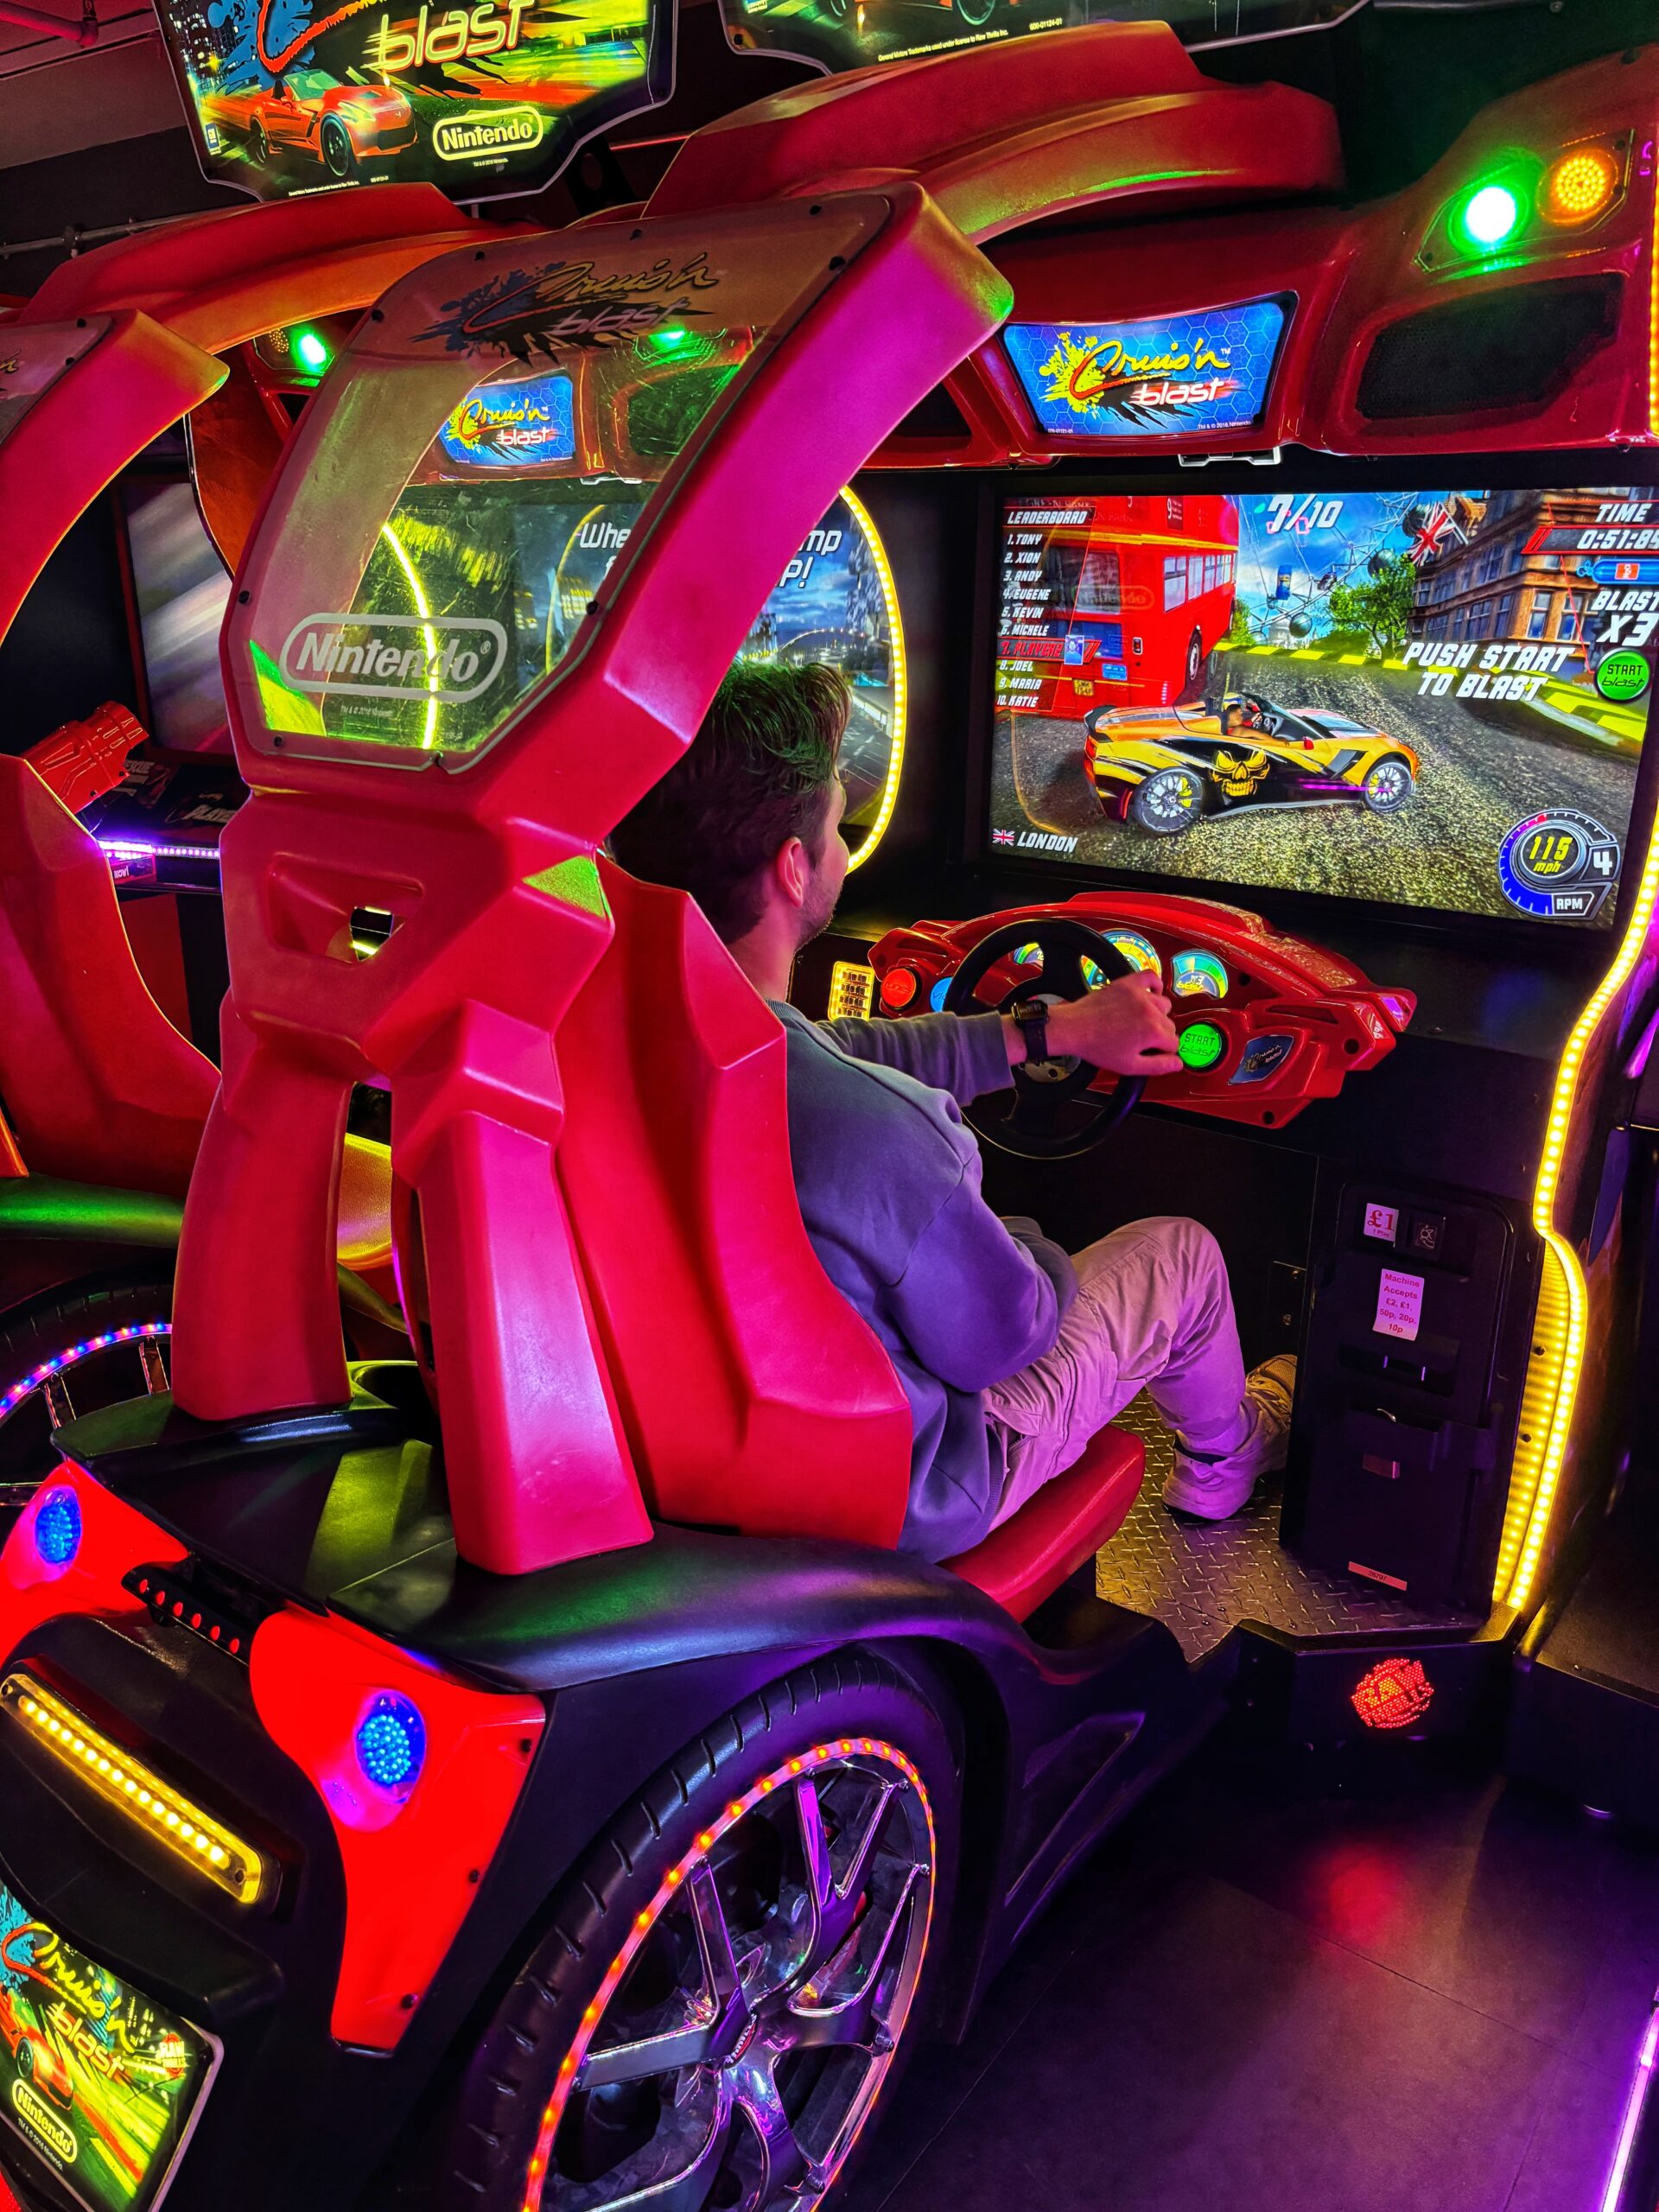 There are loads of arcade games to play at Tenpin Manchester Printworks